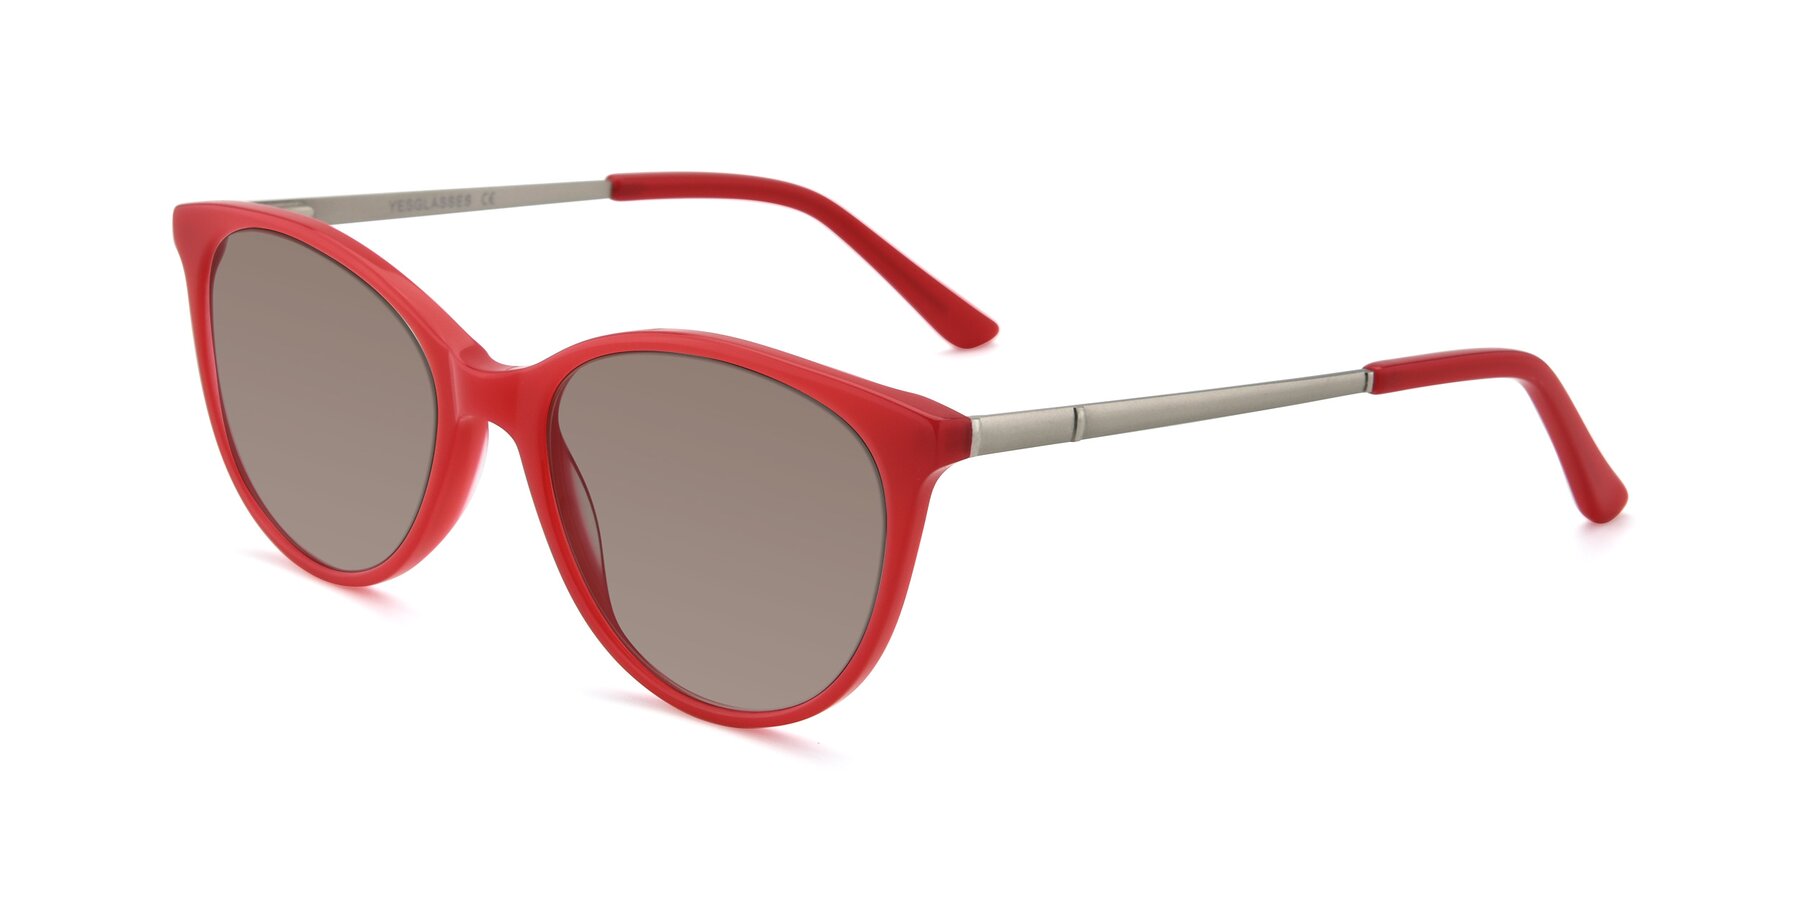 Angle of SR6062 in Rose with Medium Brown Tinted Lenses